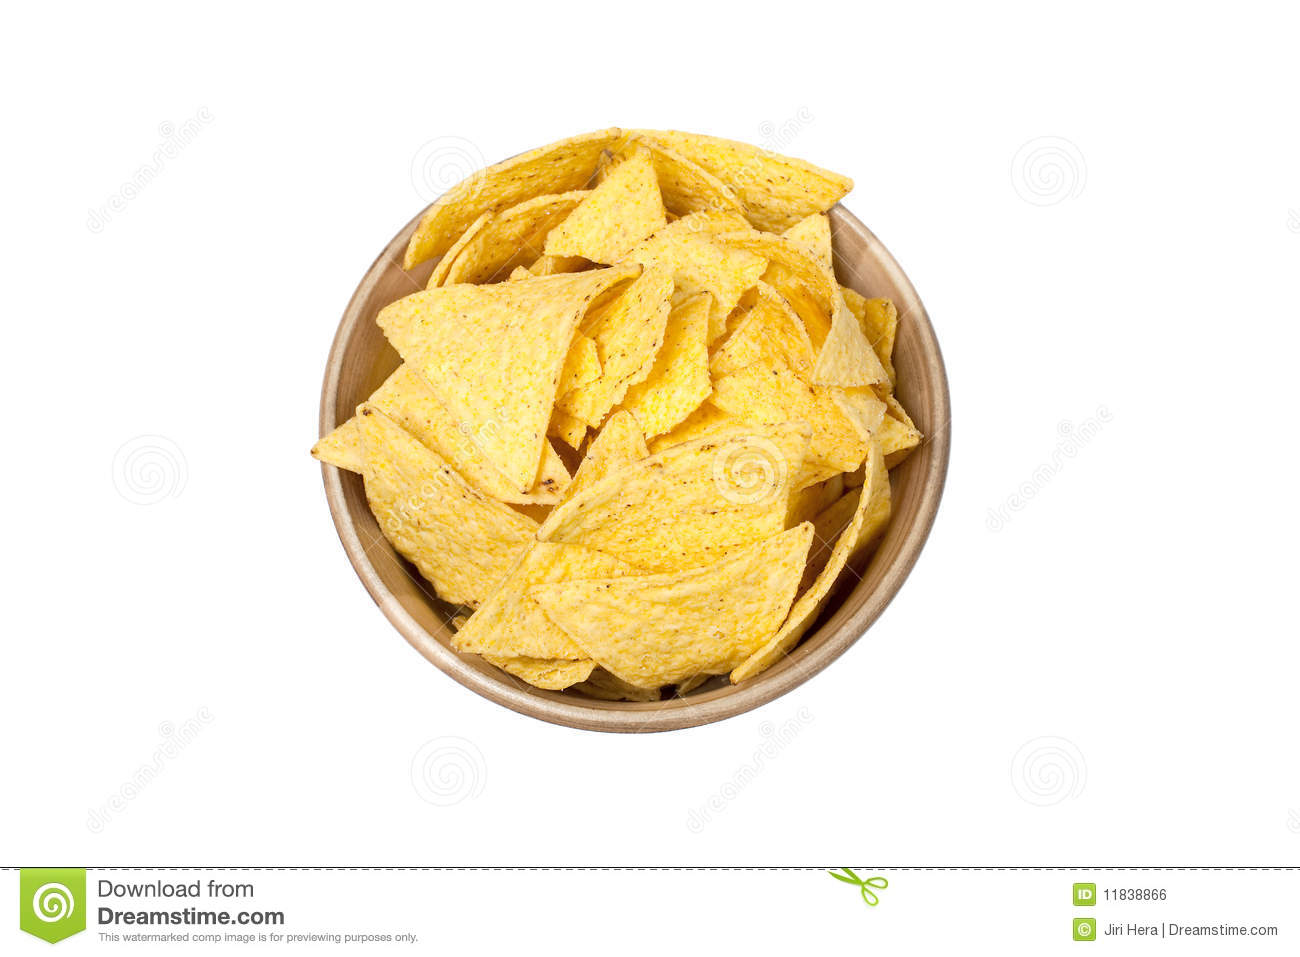 Tortilla Chips In Bowl Royalty Free Stock Image   Image  11838866